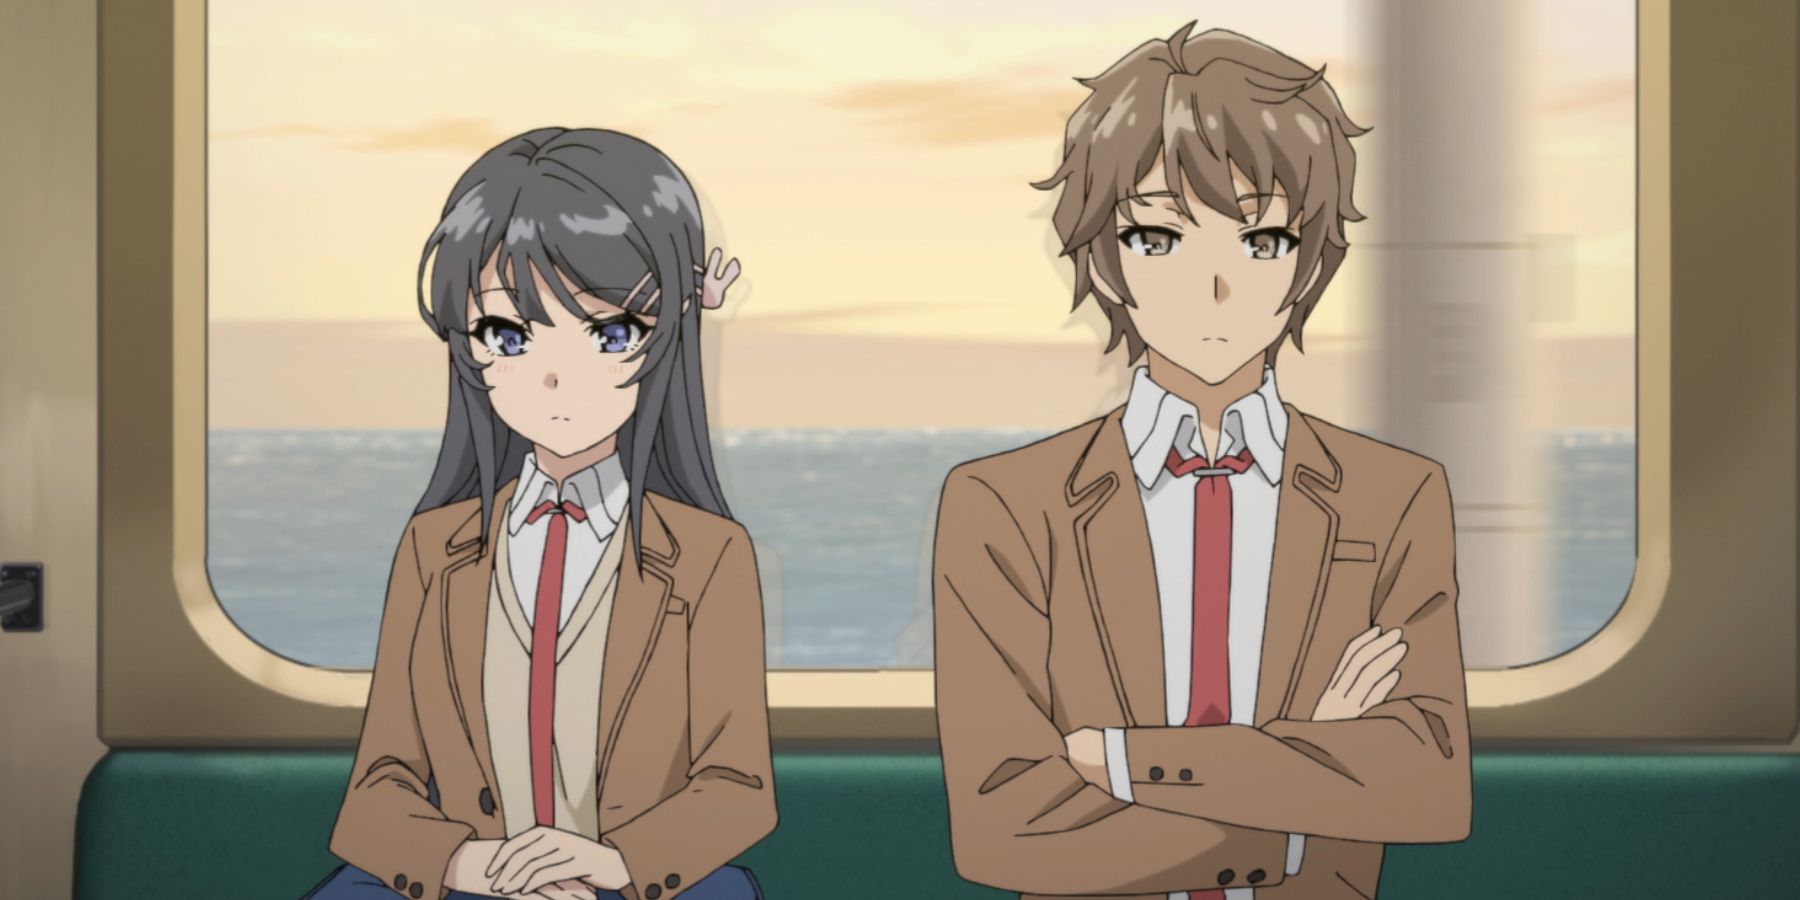 Rascal-Does-Not-Dream-of-Bunny-Girl-Senpai-anime-featured-image-1